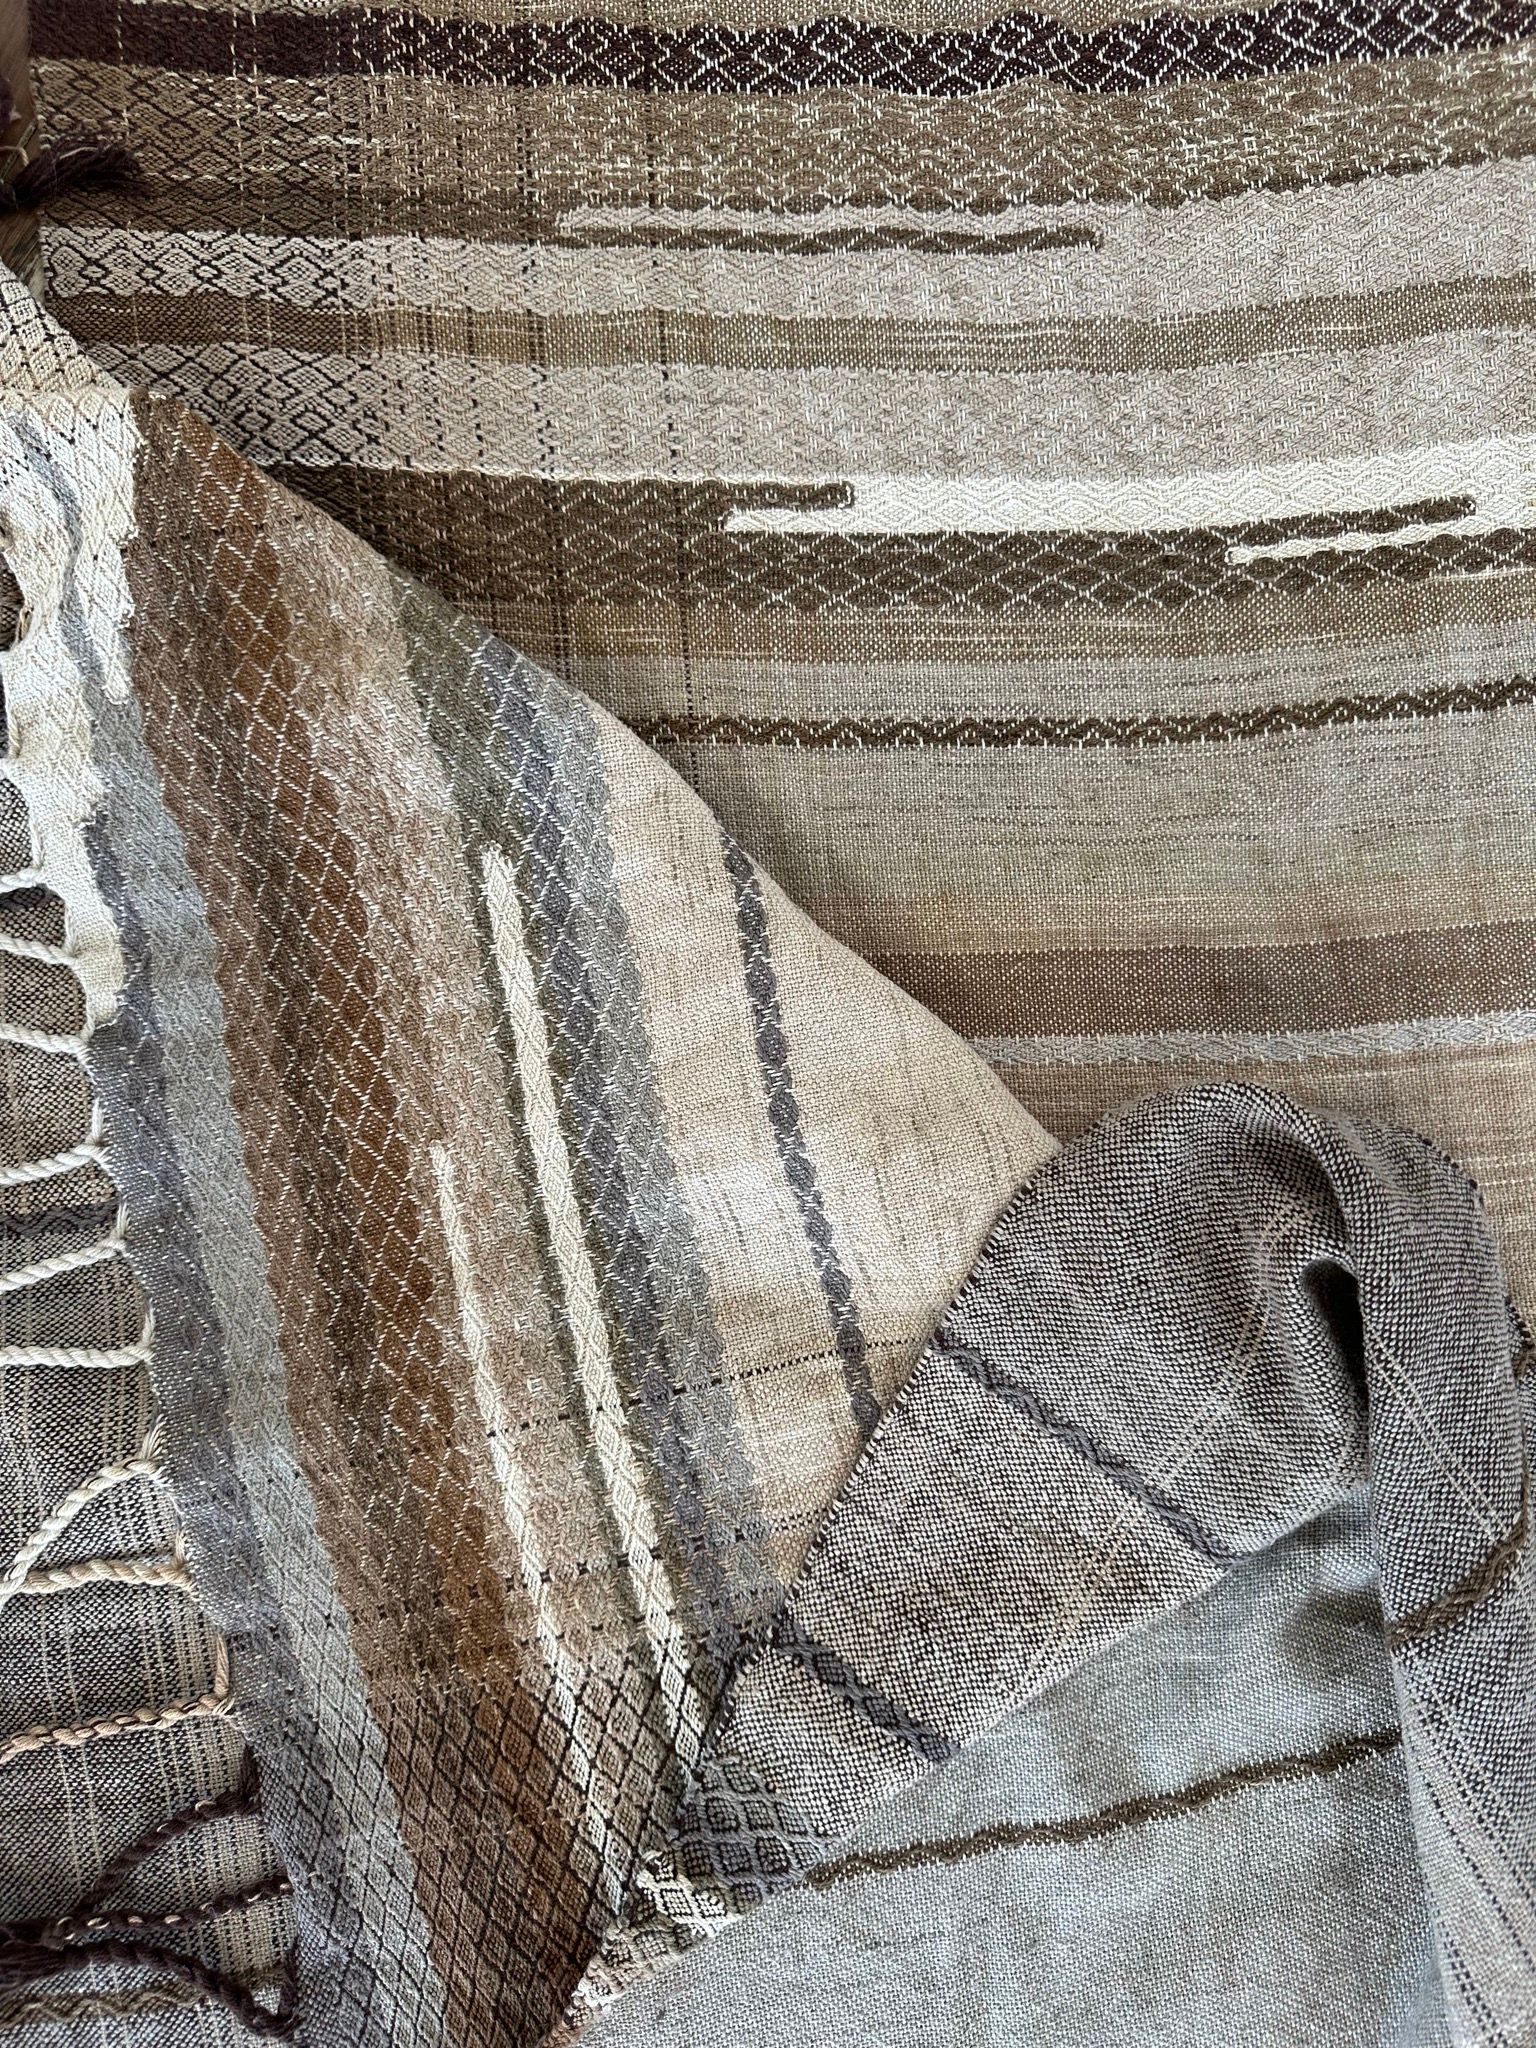 Details of a handwoven naturally dyed raw silken organic cotton linen shawl with diamond pattern and stripes of gradations of grey, brown, tan and white.